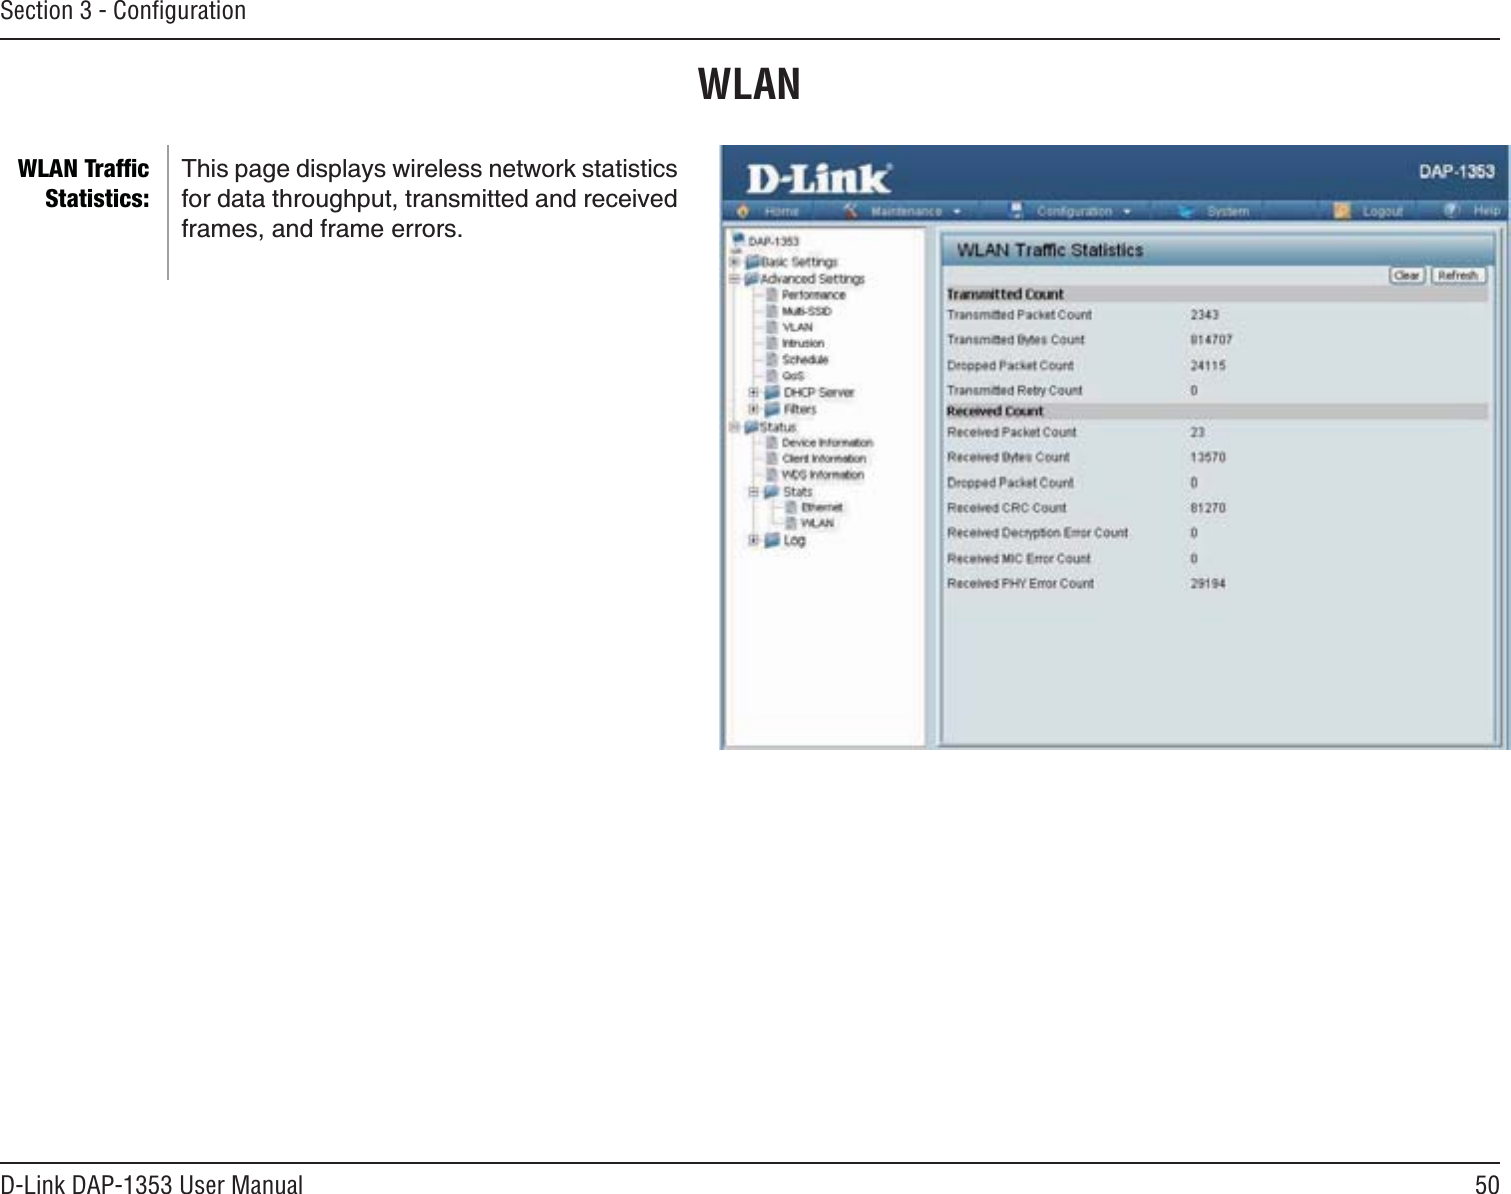 50D-Link DAP-1353 User ManualSection 3 - ConﬁgurationWLANThis page displays wireless network statistics for data throughput, transmitted and received frames, and frame errors.WLAN Trafﬁc Statistics: